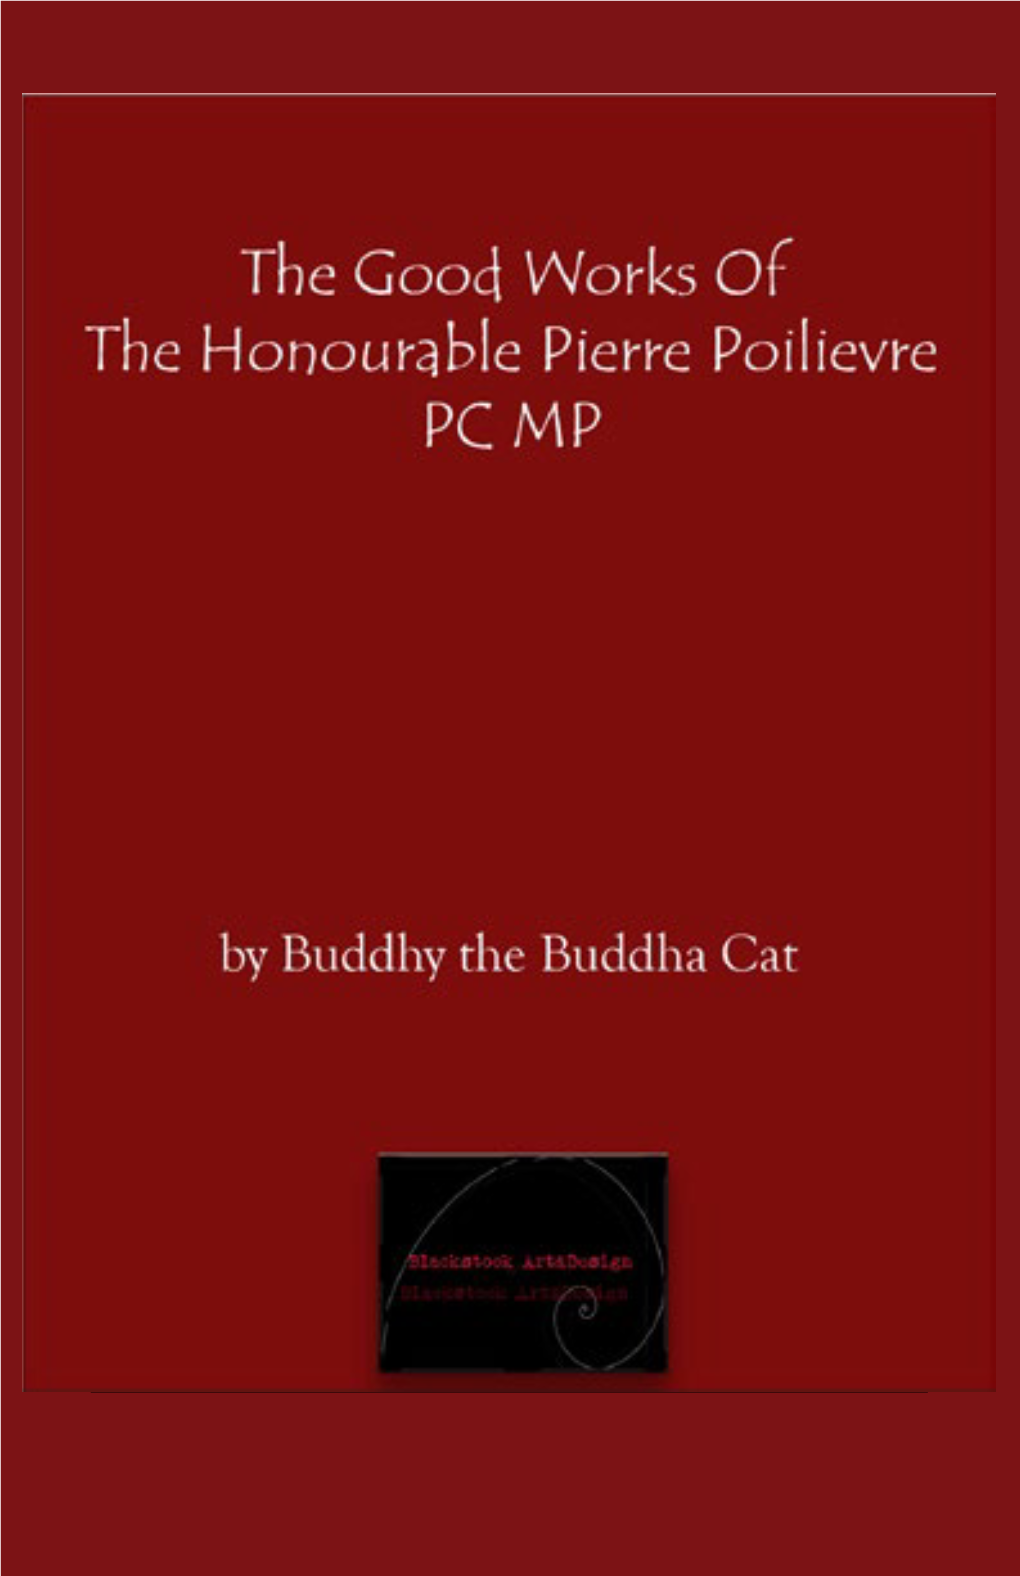 The Good Works of the Honourable Pierre Poilievre PC MP by Buddhy the Buddha Cat